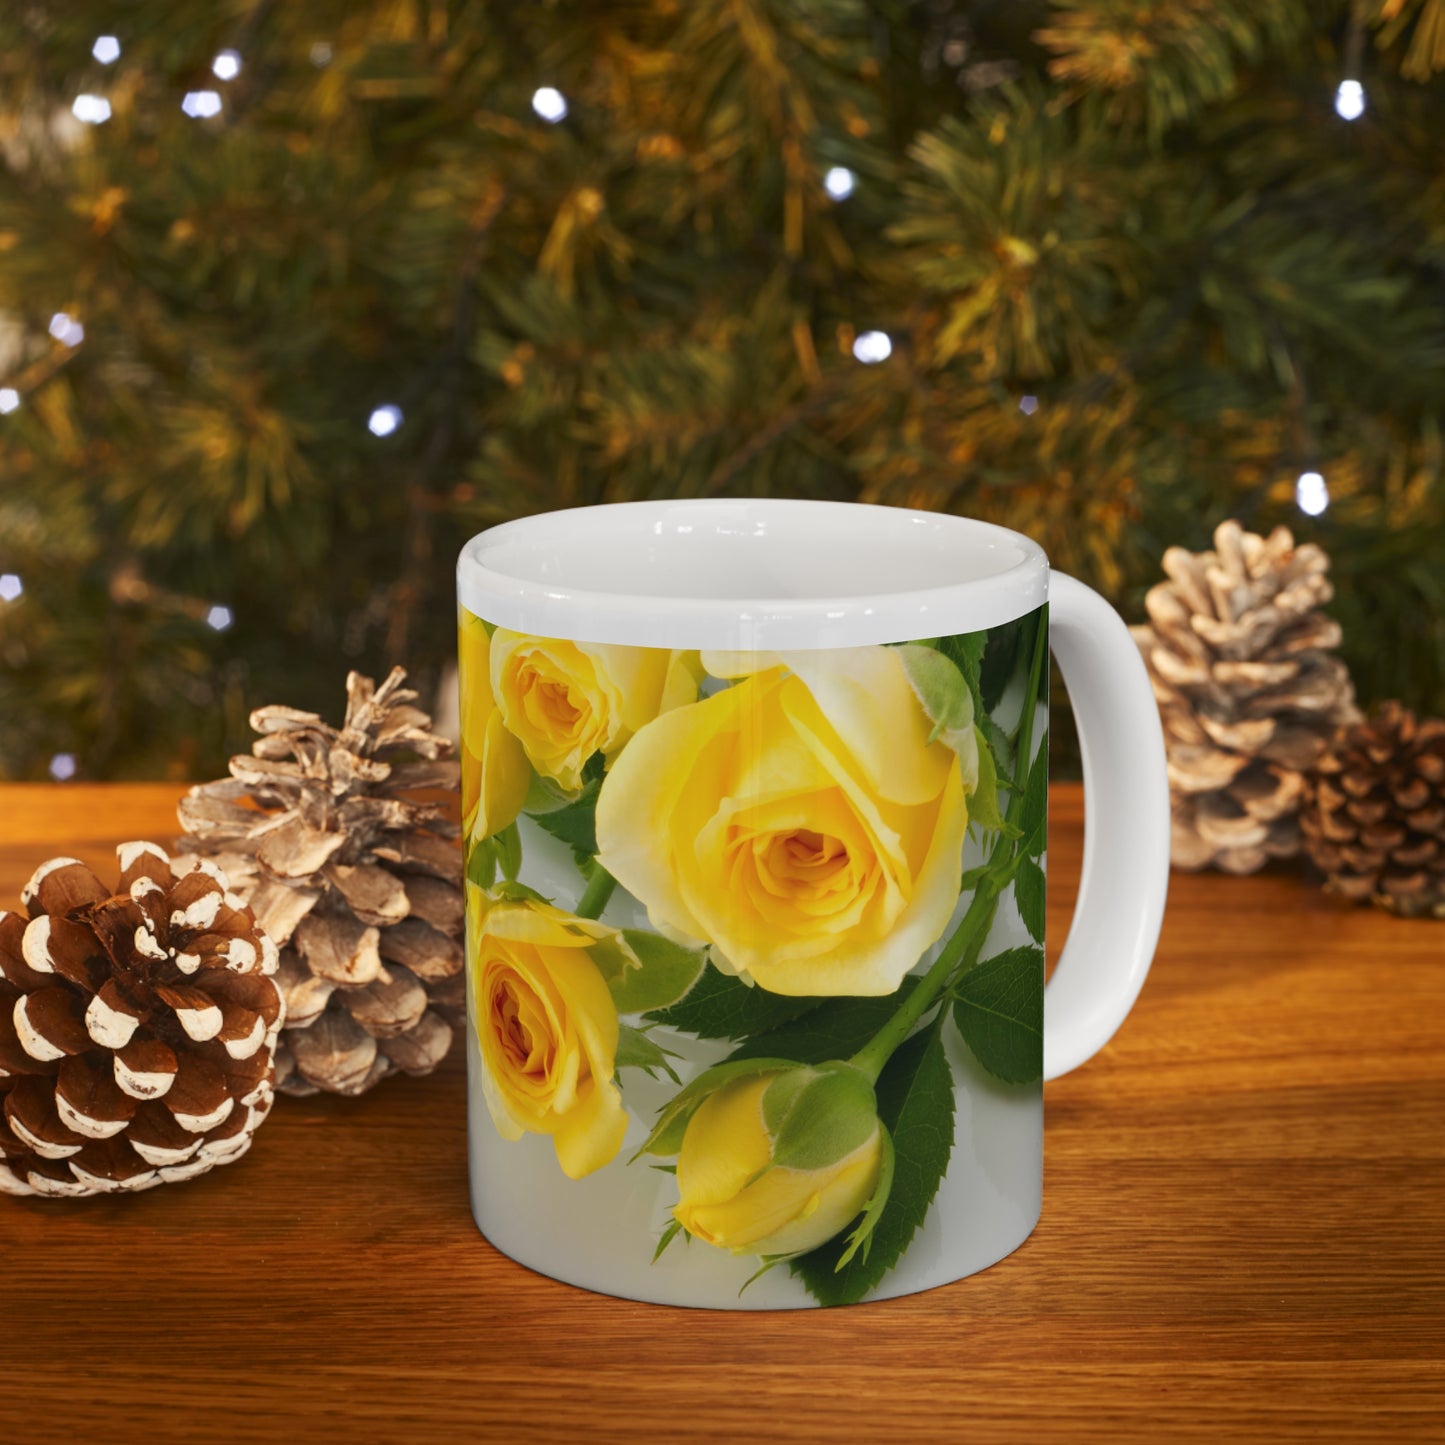 You make a difference recognition coffee mug with yellow roses to complete the positive message! Perfect as a gift or for yourself as a daily affirmation.